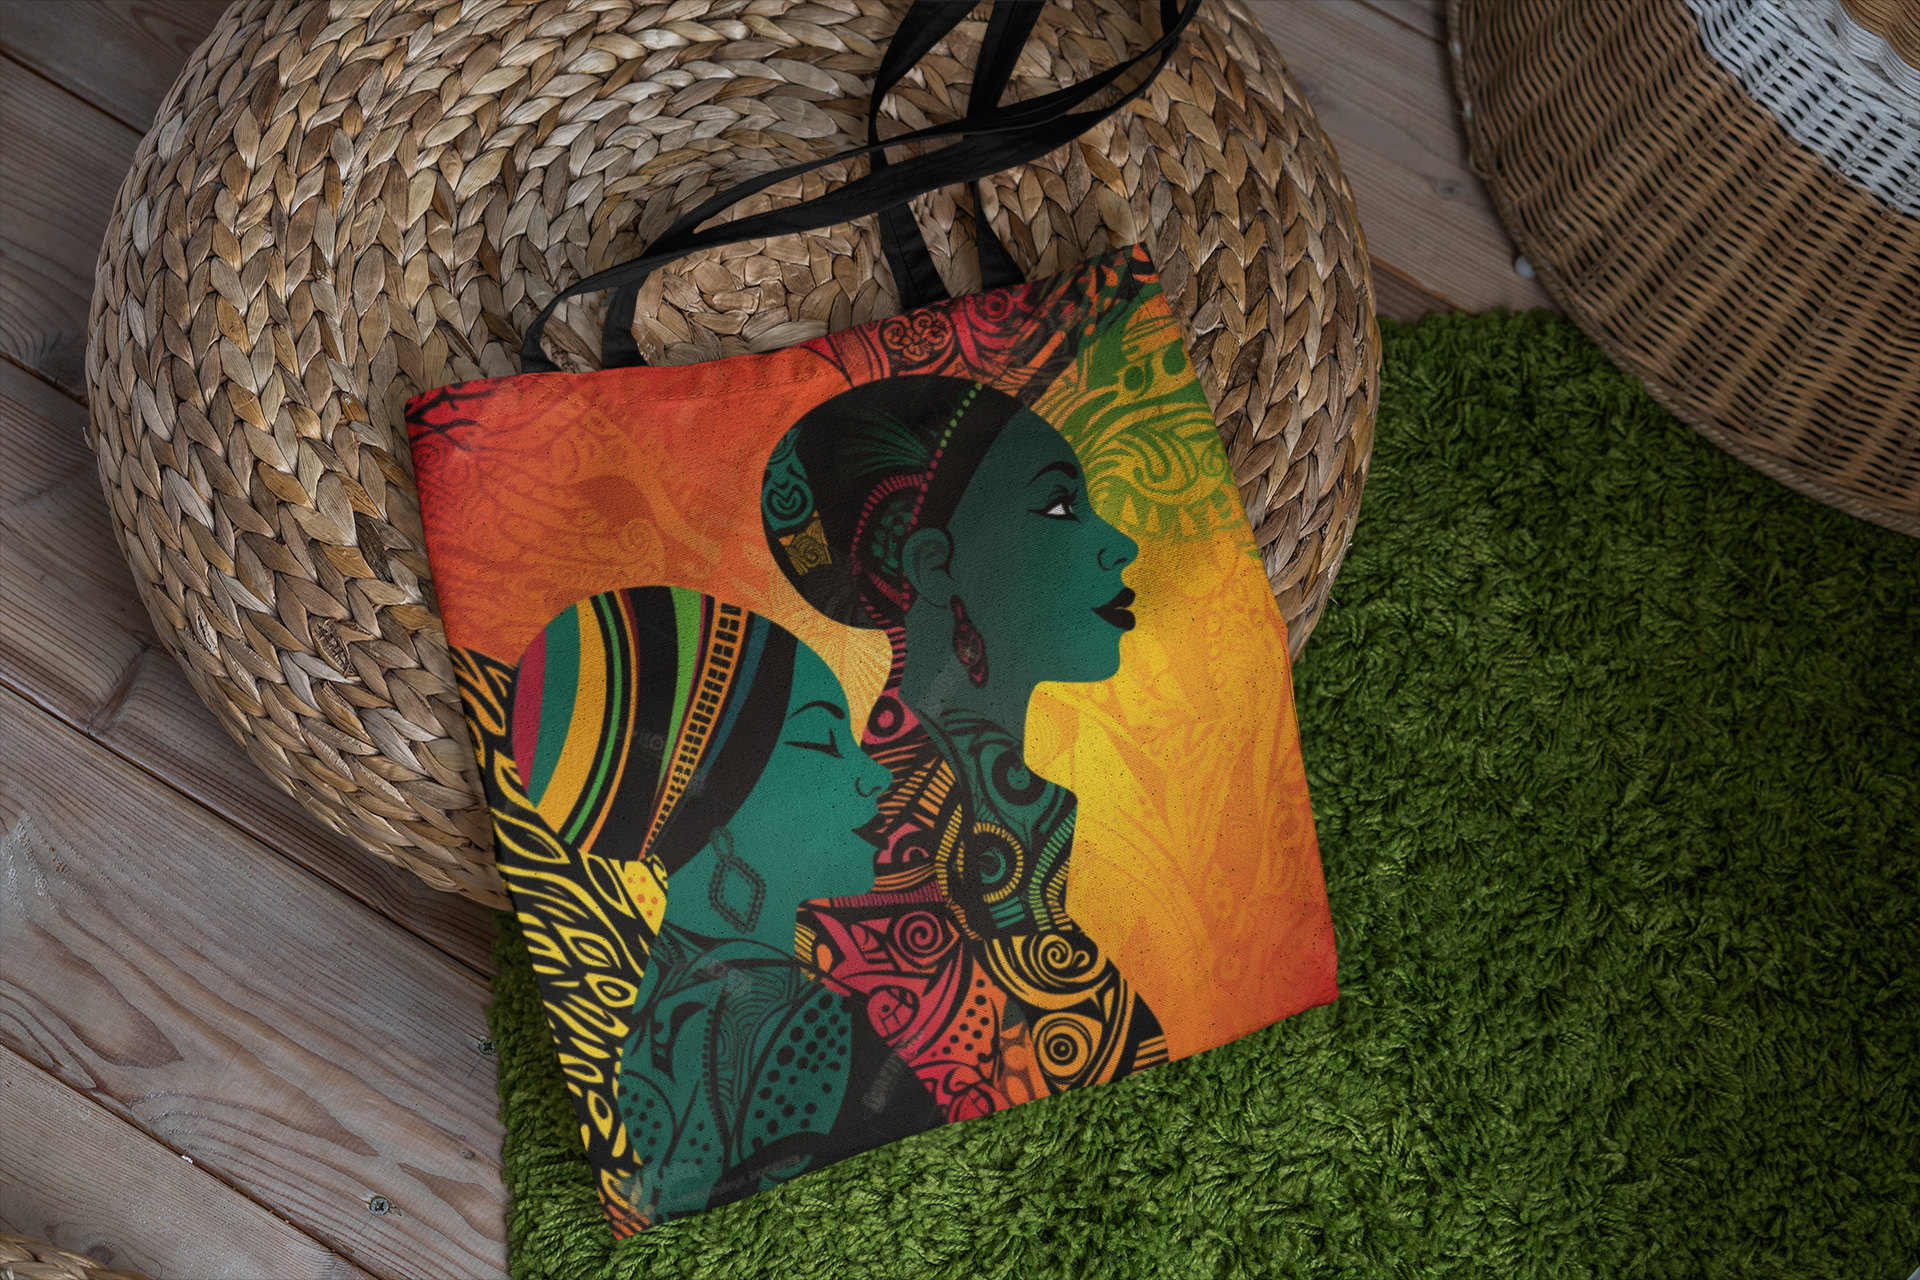 "TWO WOMEN" - LIBERATION THEMED TOTE Bag